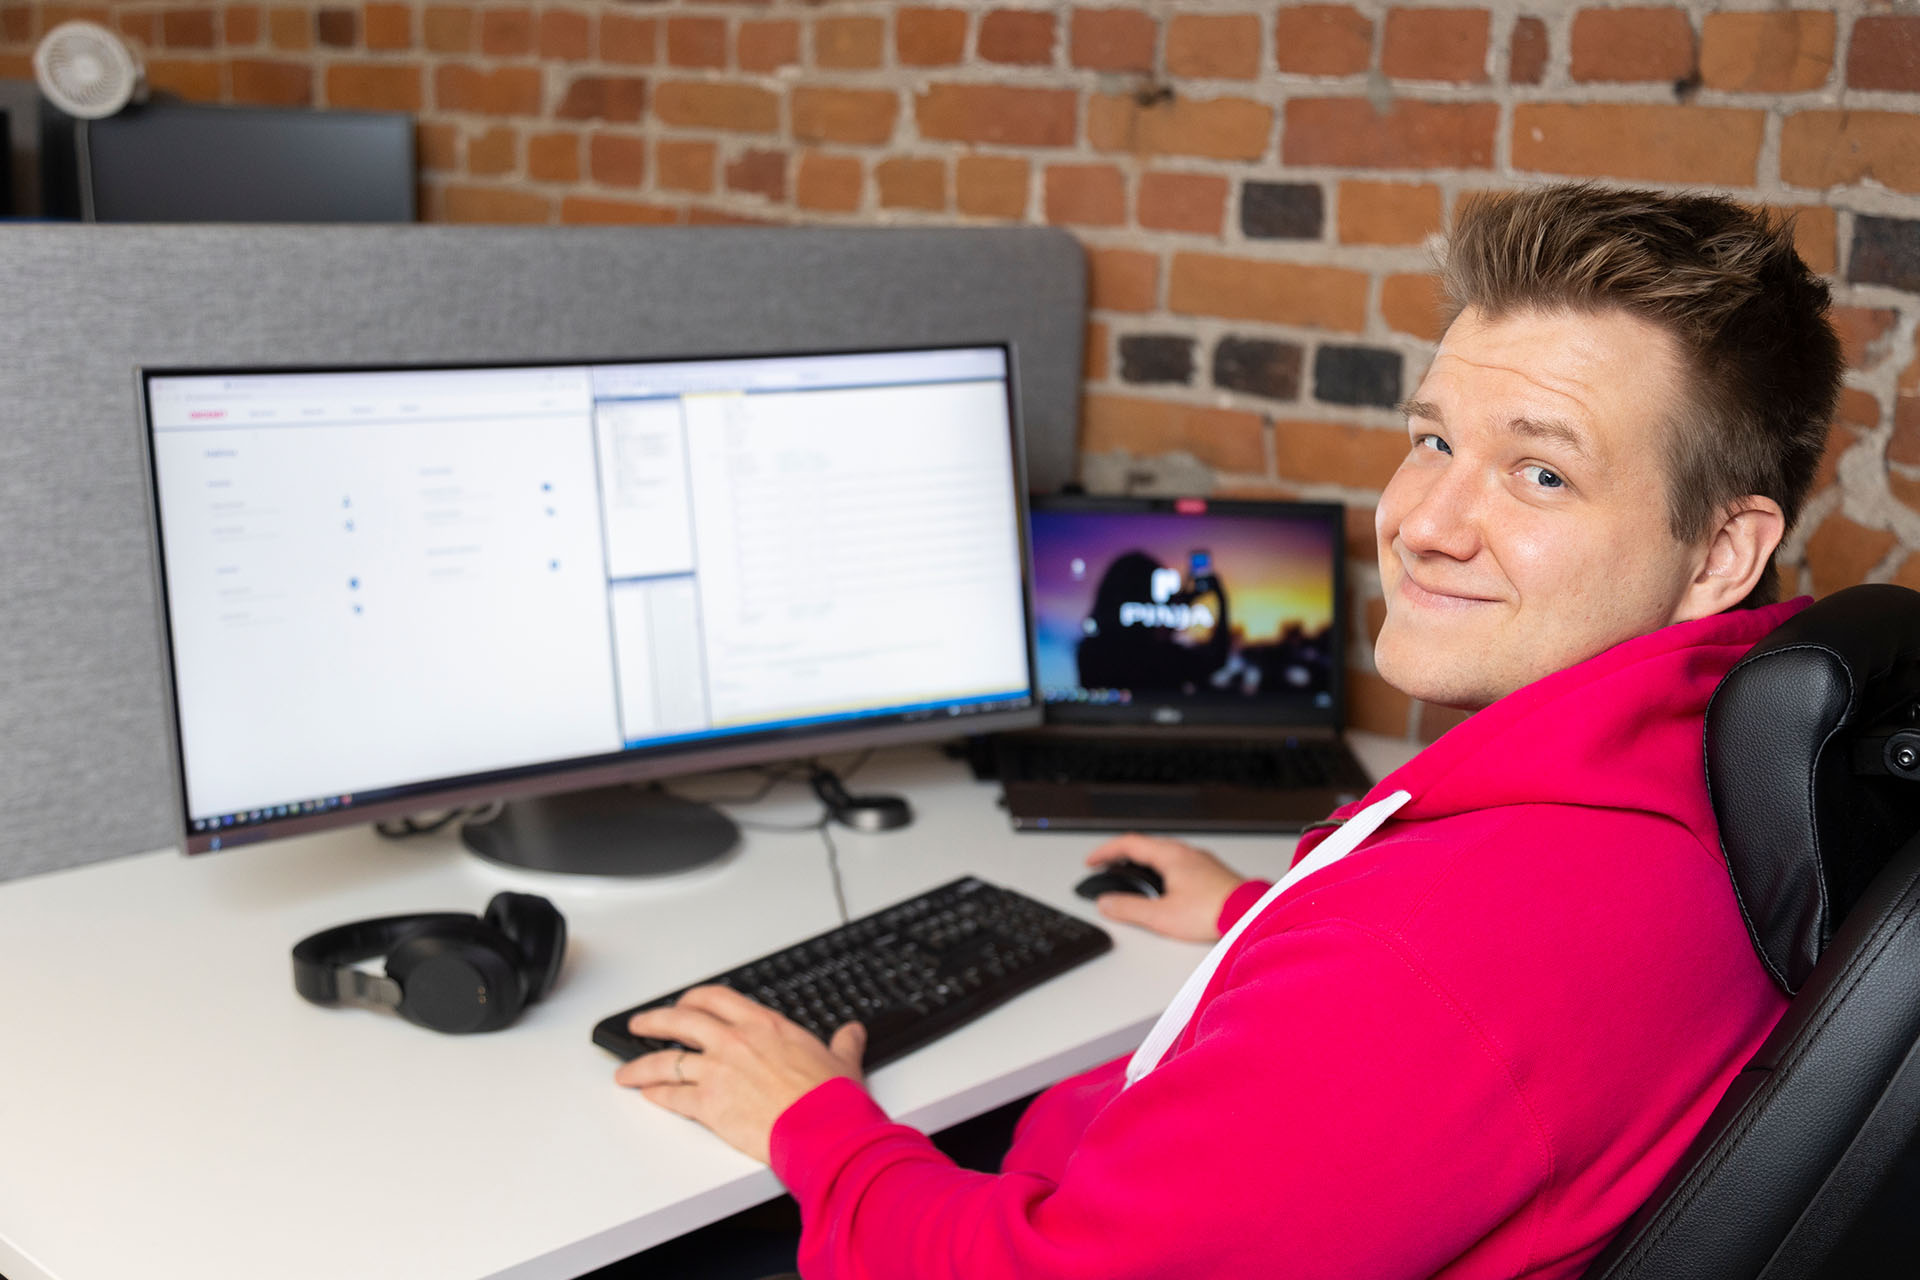 A man in a pink hoodie sitting at a computer looks over his shoulder at the camera, smiling